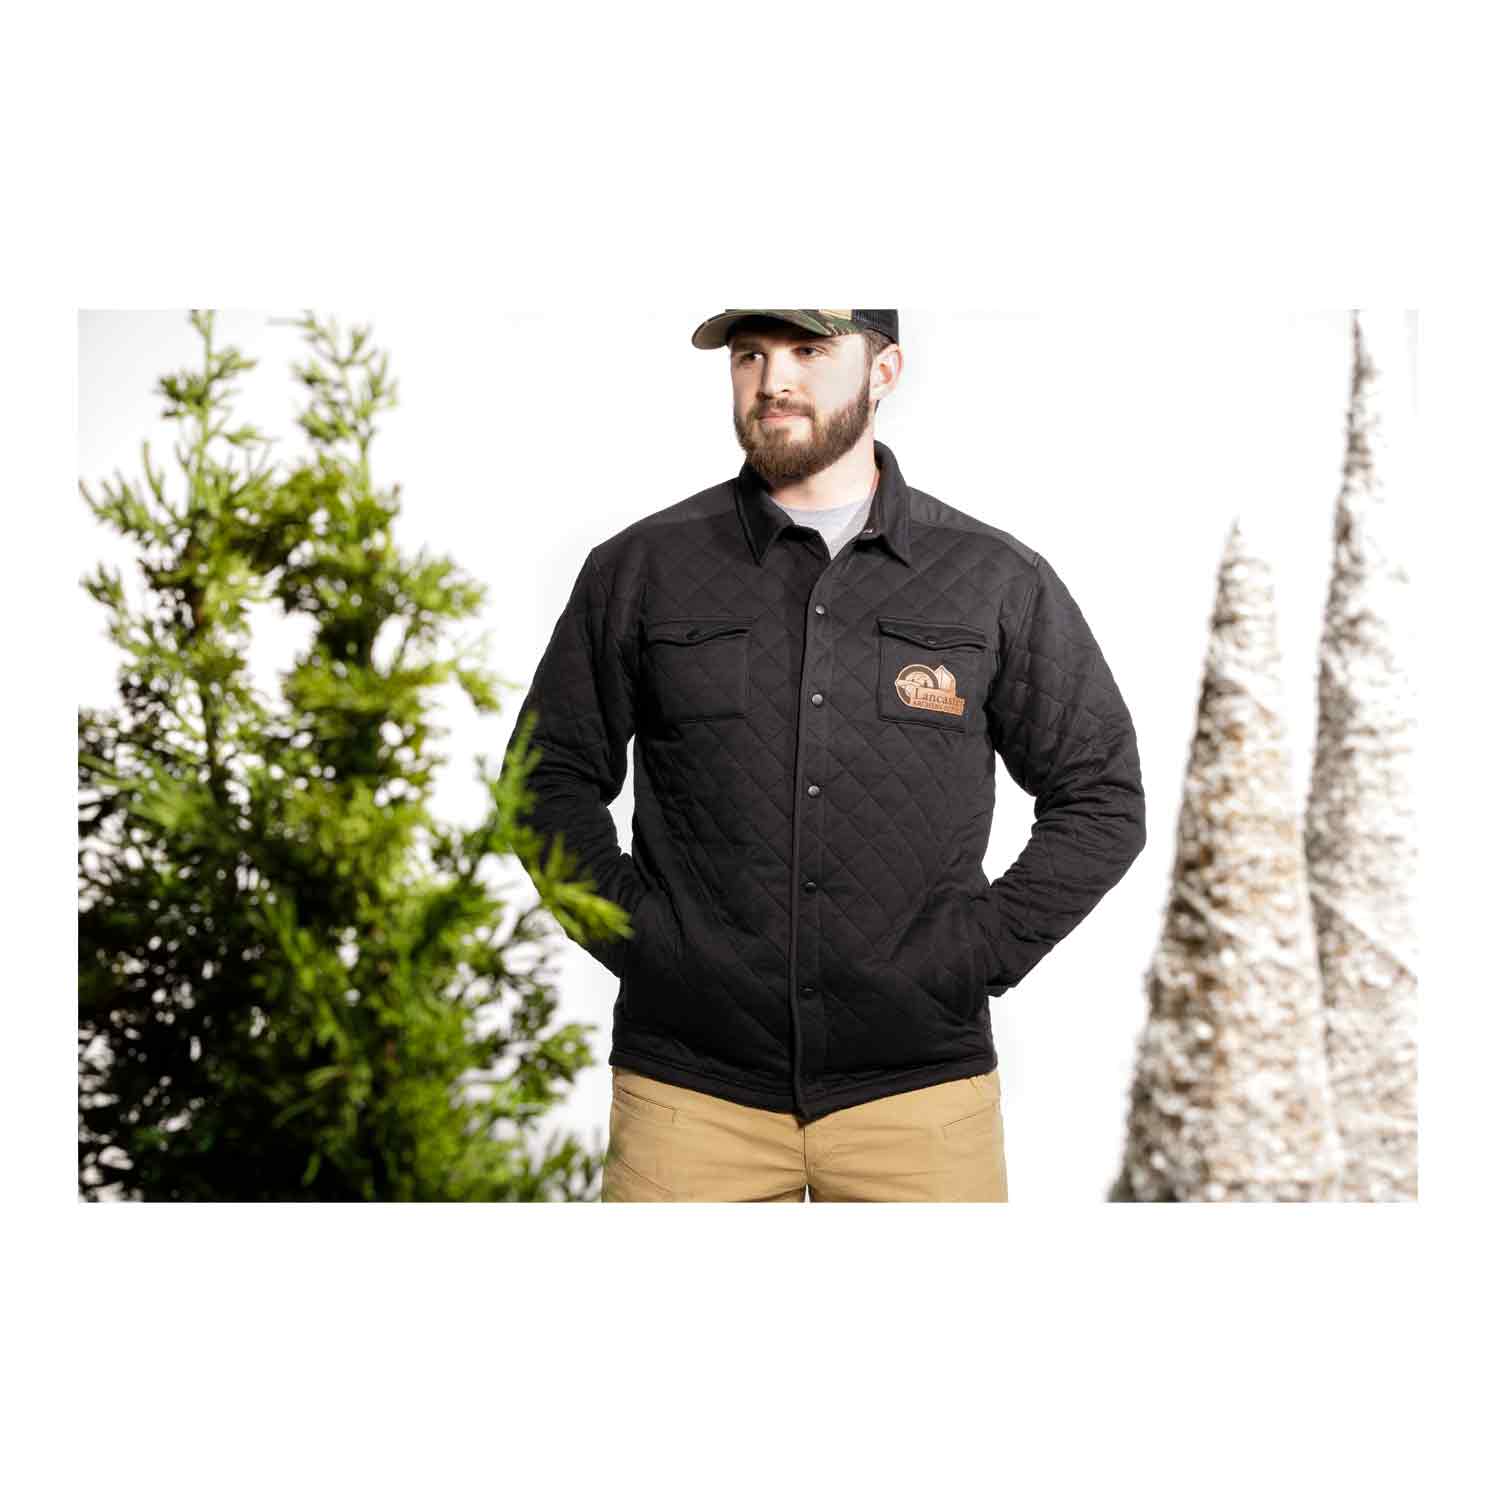 Lancaster Archery Quilted Jersey Shirt Jacket